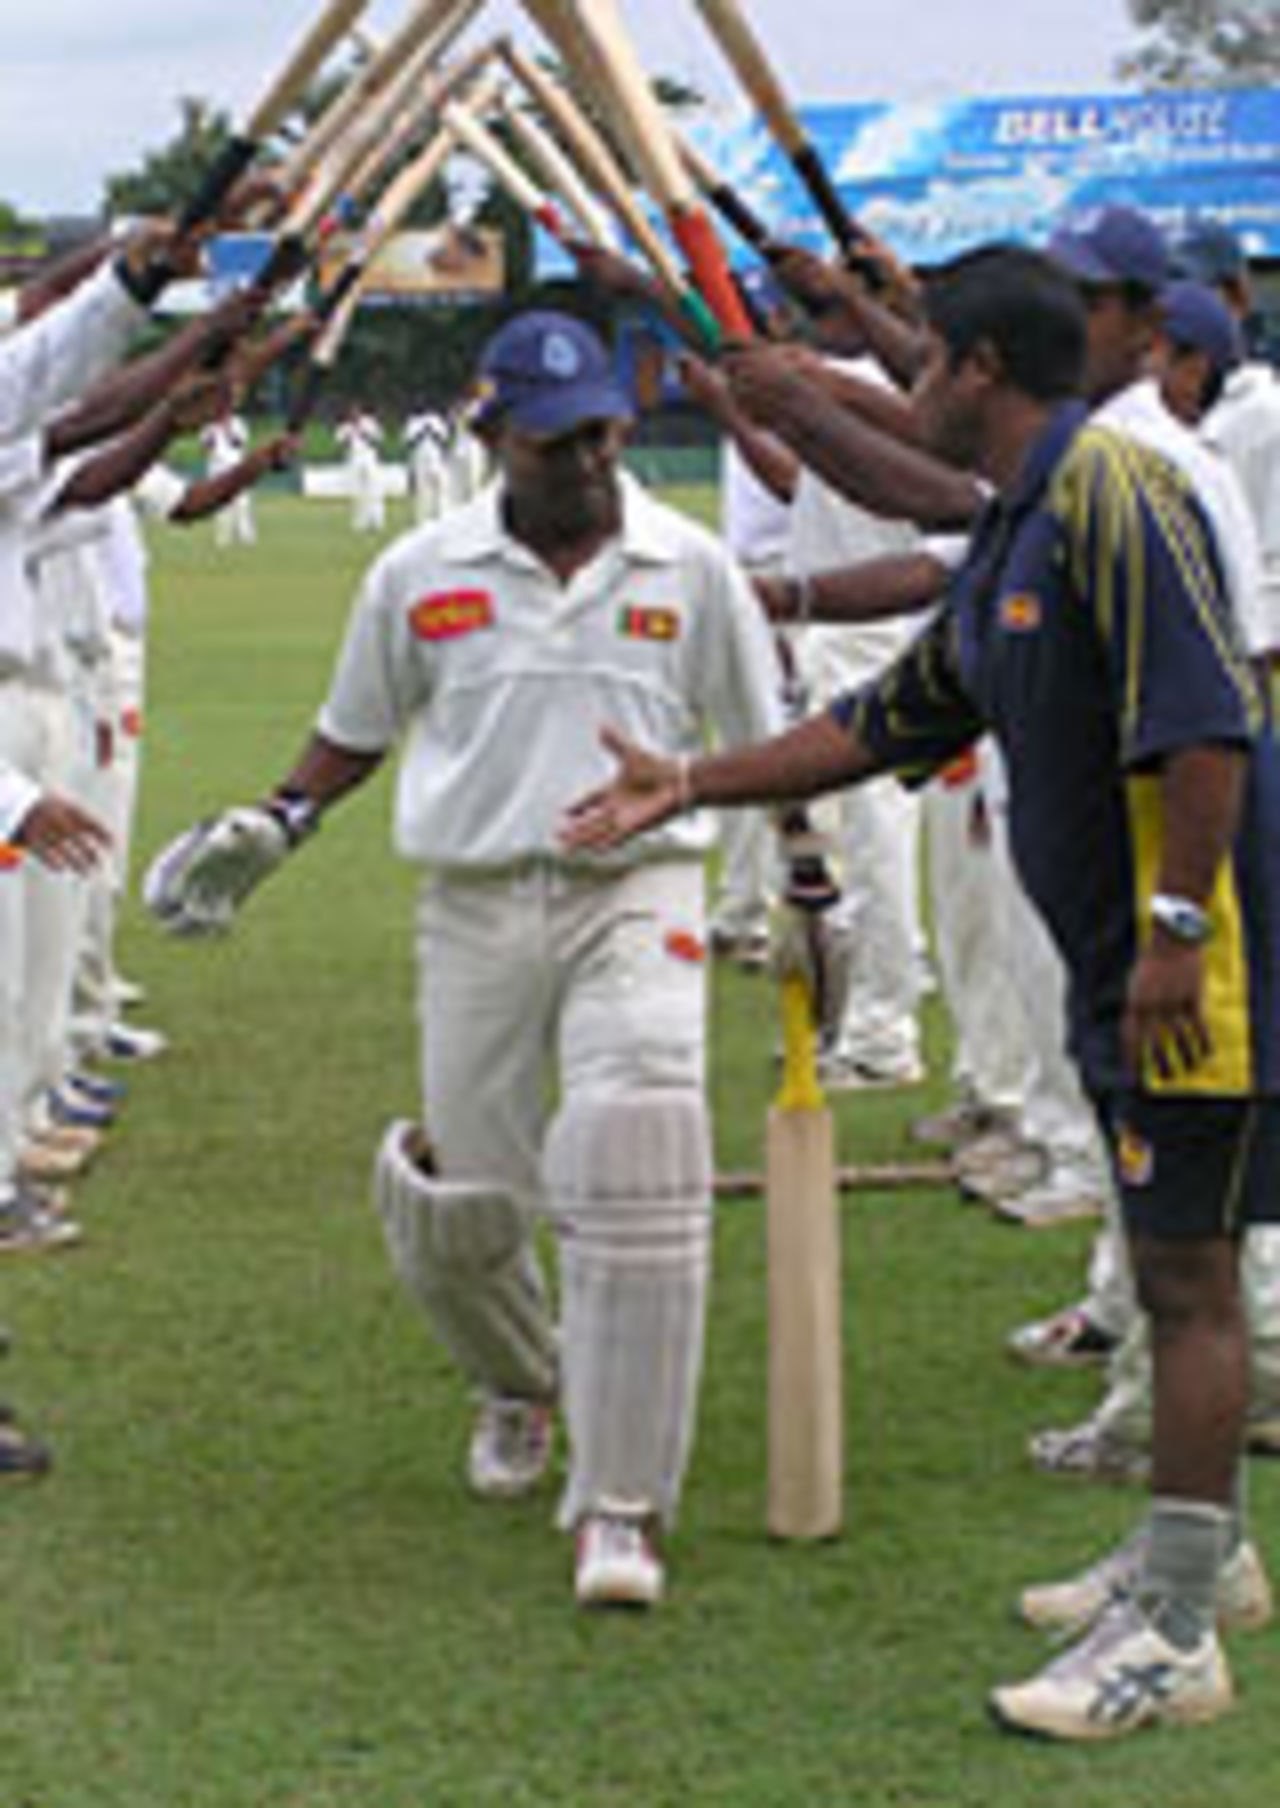 Romesh Kaulwitharana after his  final innings, for Colts Cricket Club against Burgher Recreation Club in the Premier League Tournament final of 2004-05, at Sinhalese Sports Club Ground, December 12 2004